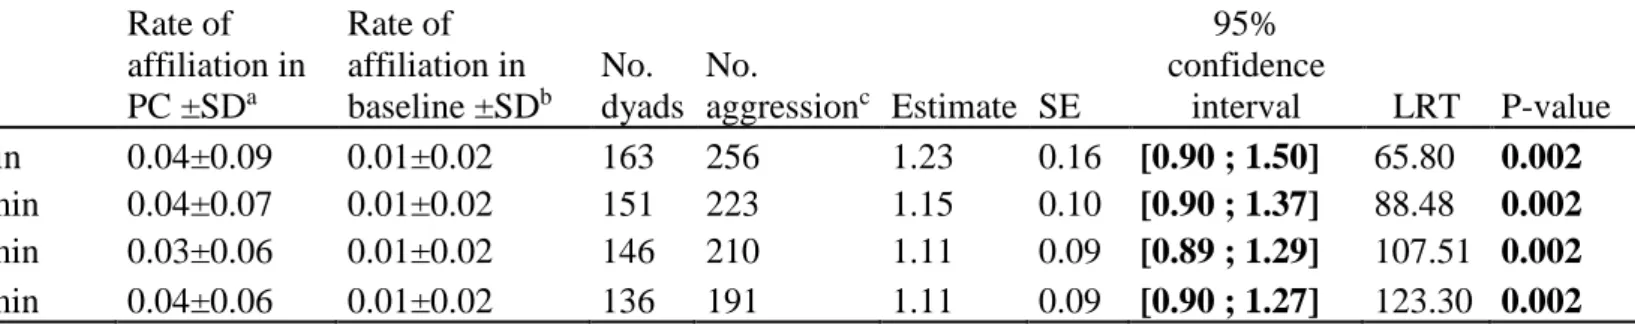 Table 2. Results of the baseline affiliation method, for four different time periods. PC: post-conflict observations